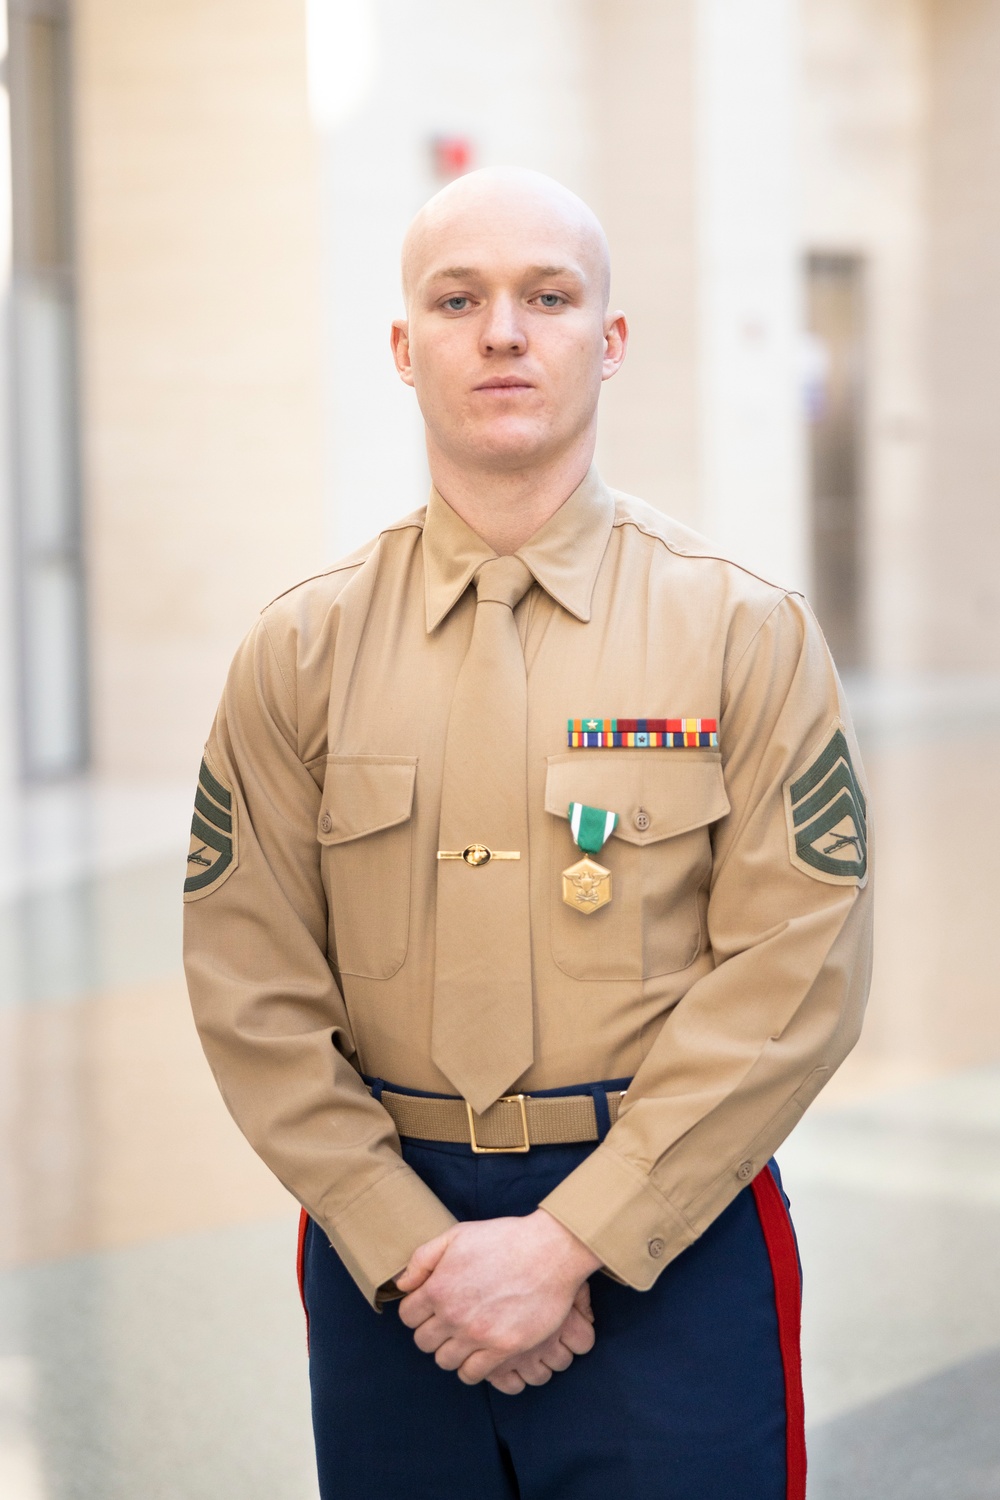 CMC official image in uniform. 